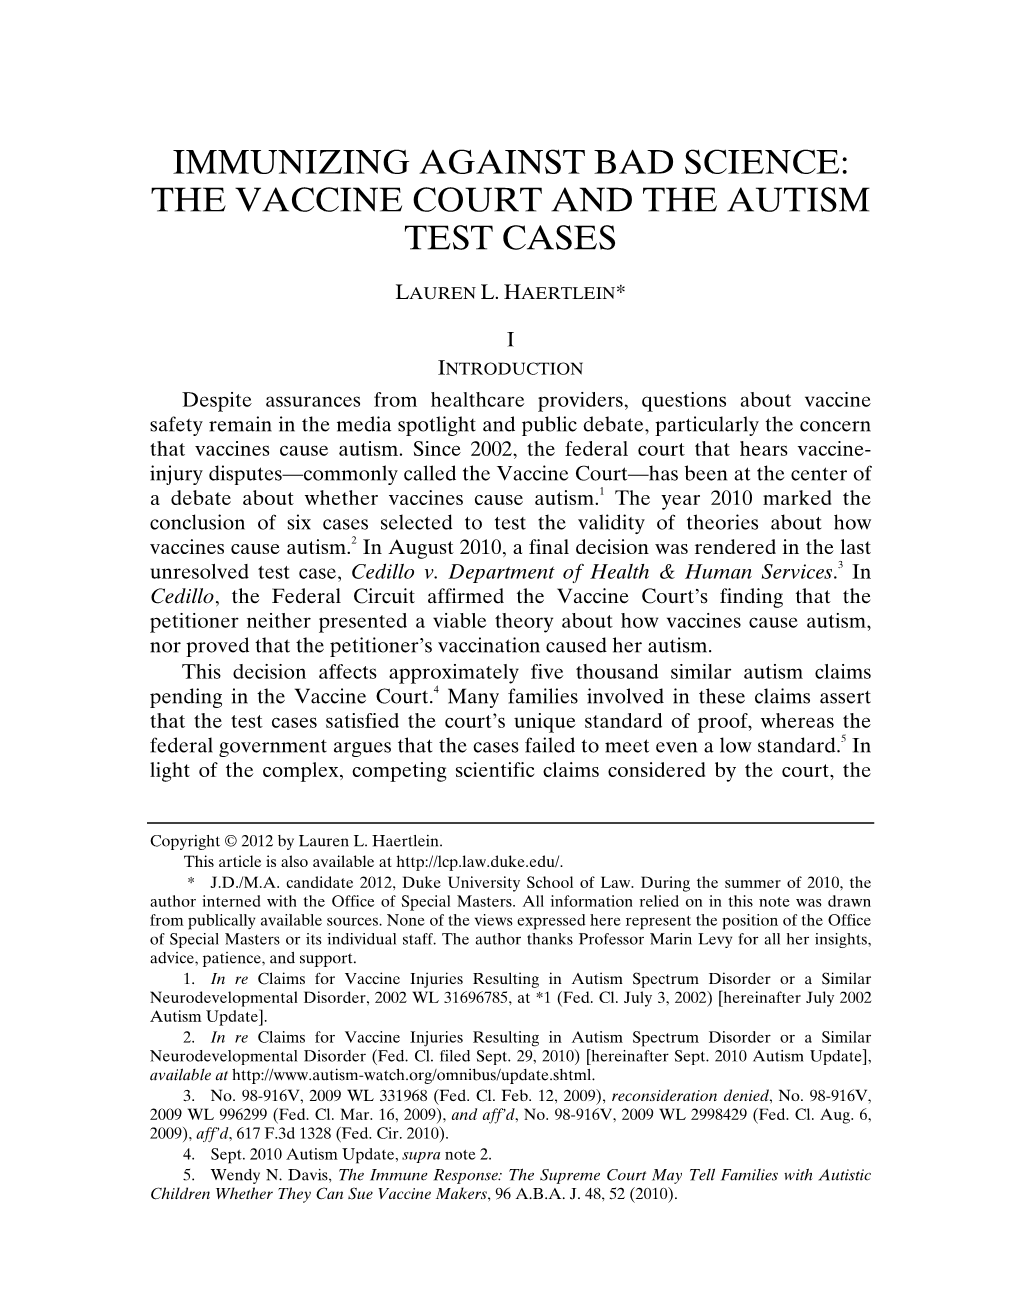 Immunizing Against Bad Science: the Vaccine Court and the Autism Test Cases